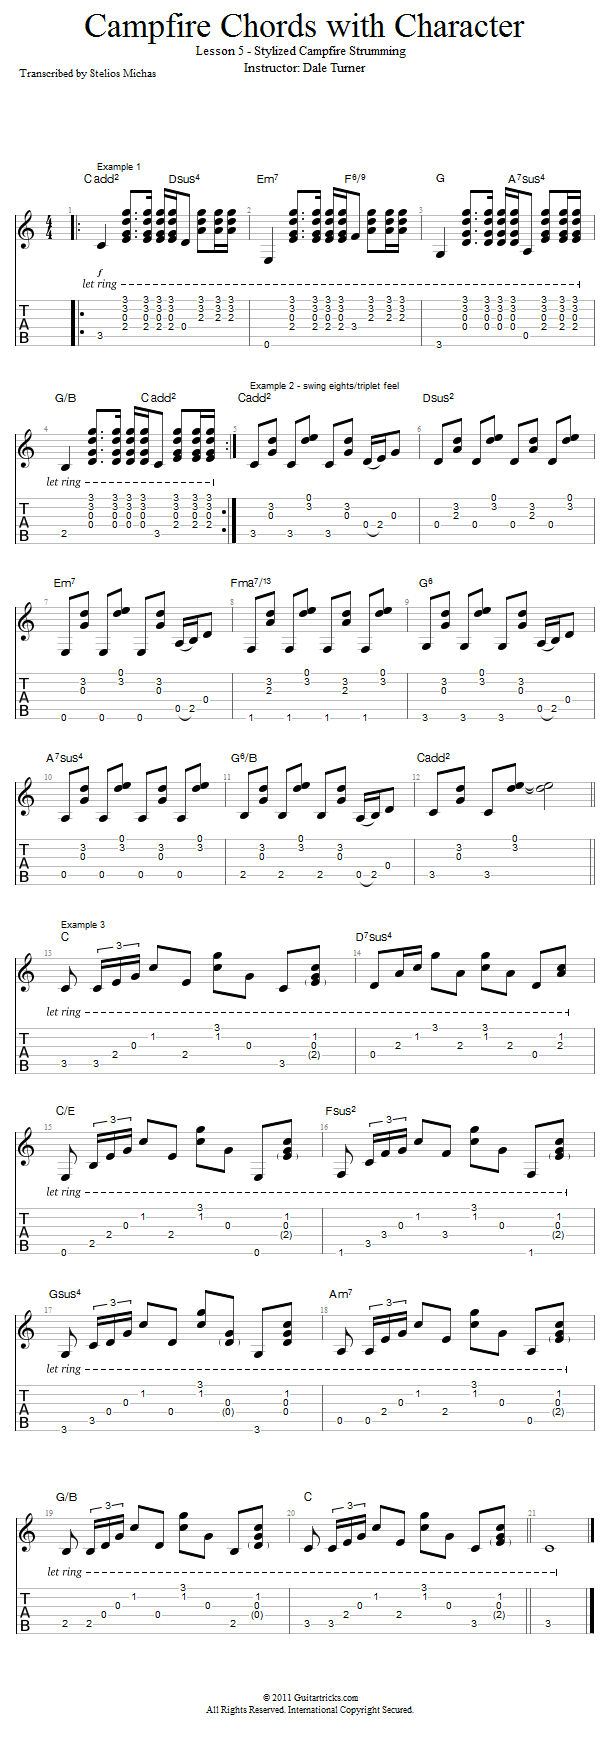 Stylized Campfire Strumming song notation